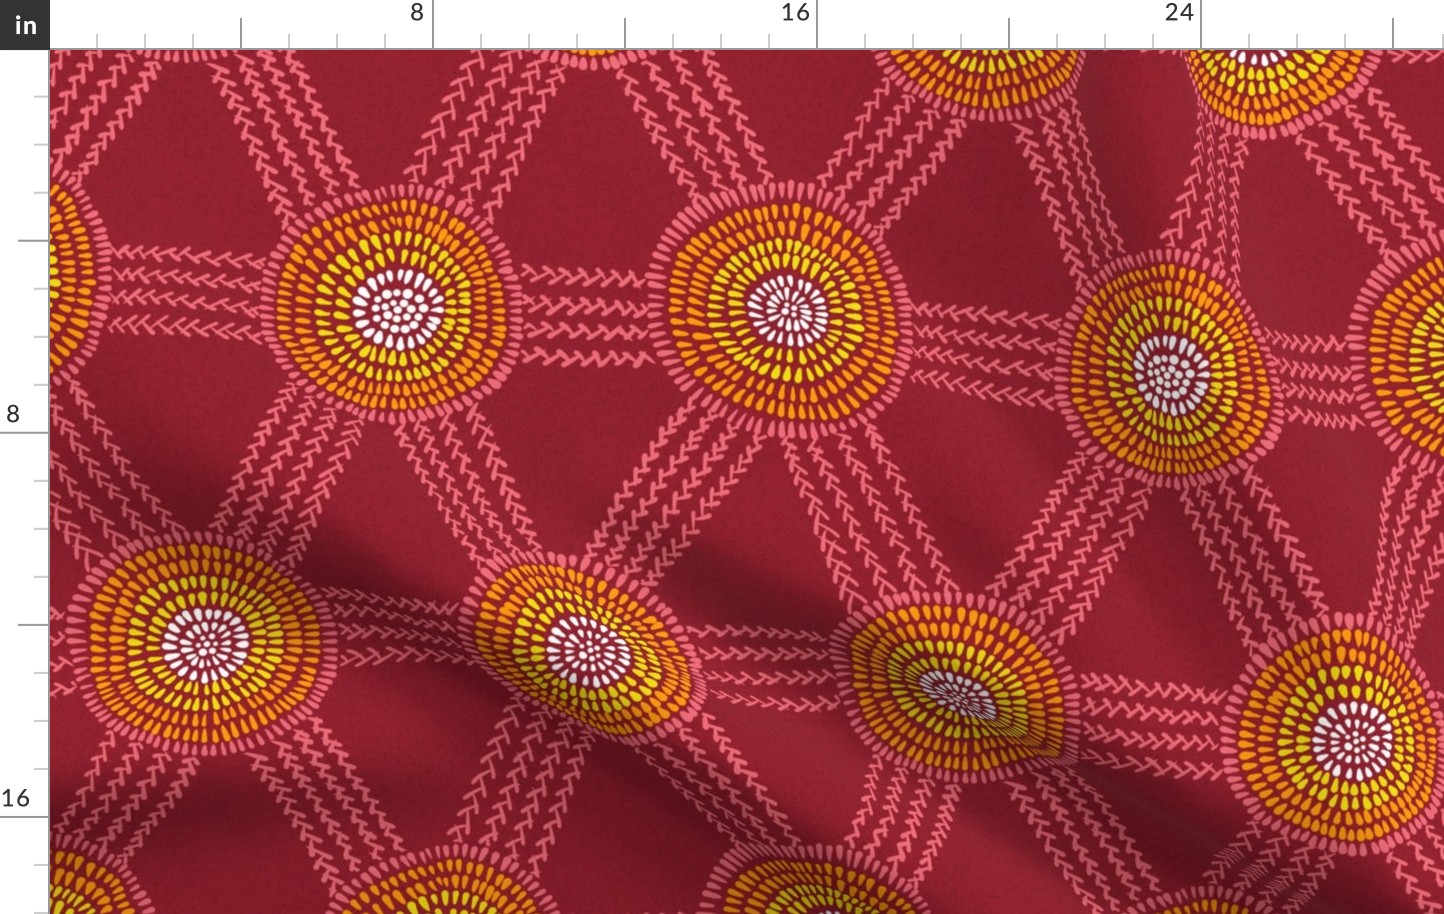 Stitched geometry on deep ruby red - medium scale / 15" fabric / 12" wallpaper